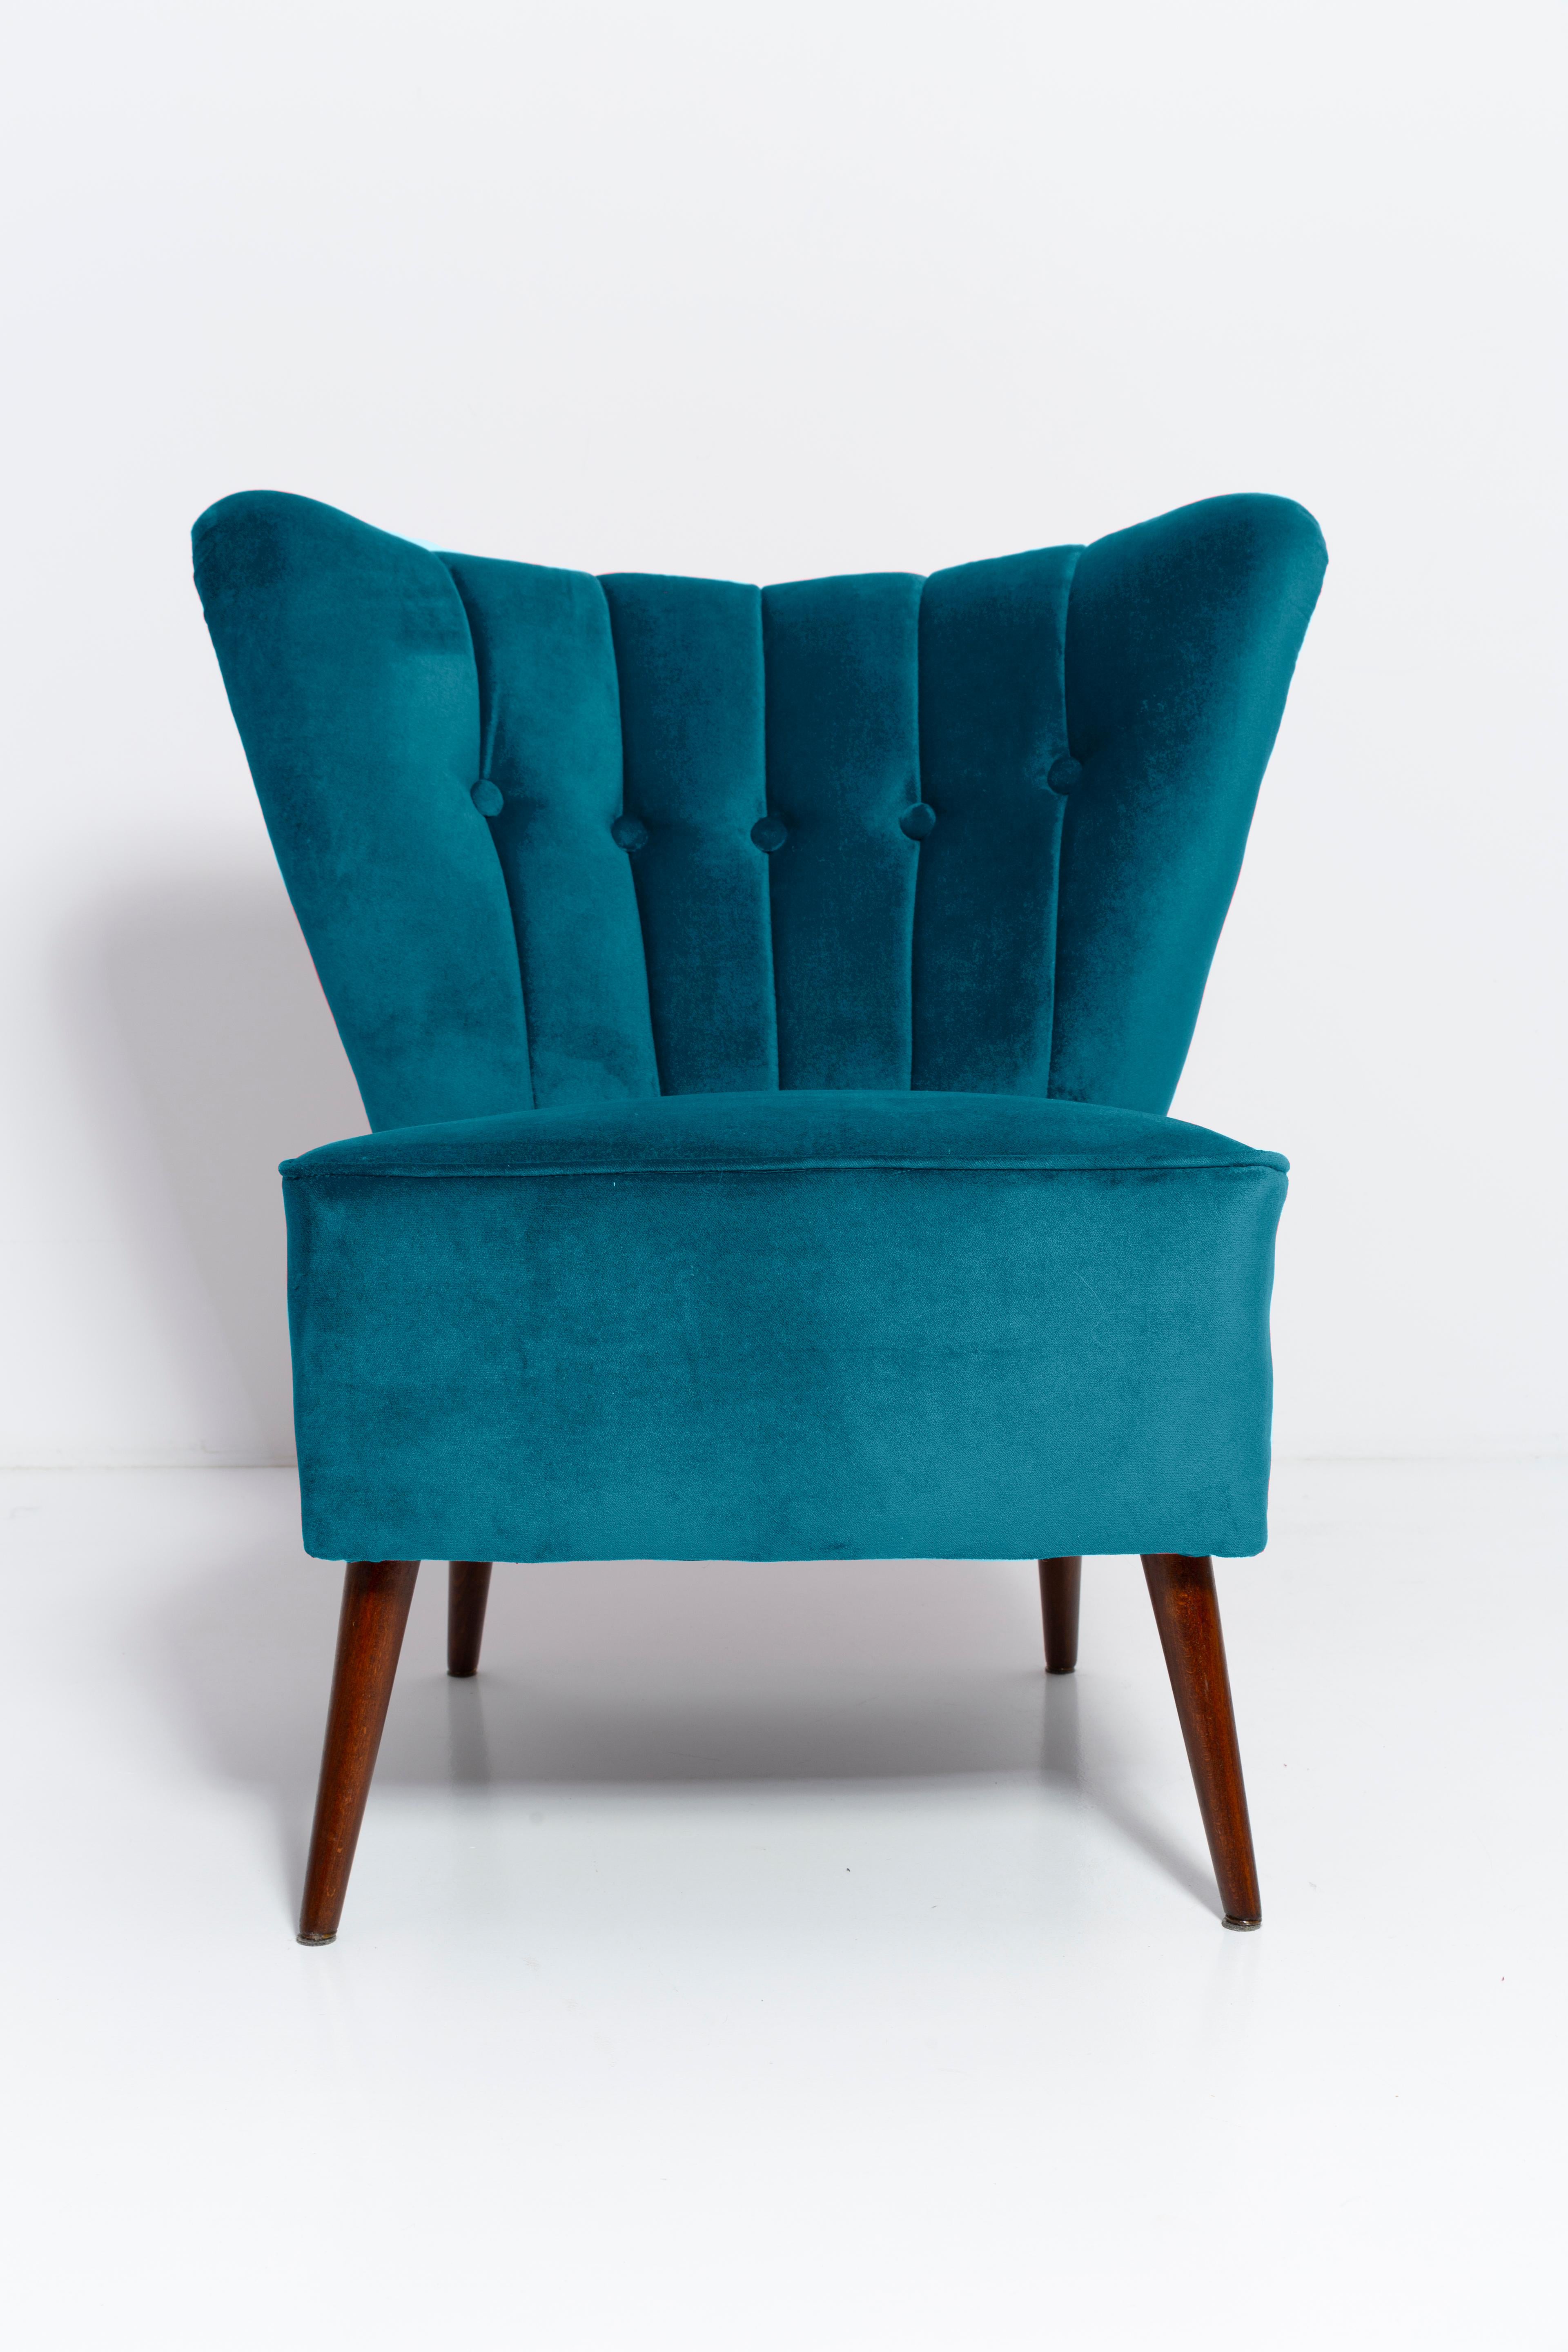 Set of Two Midcentury Petrol Blue Velvet Club Armchairs, Europe, 1960s For Sale 2